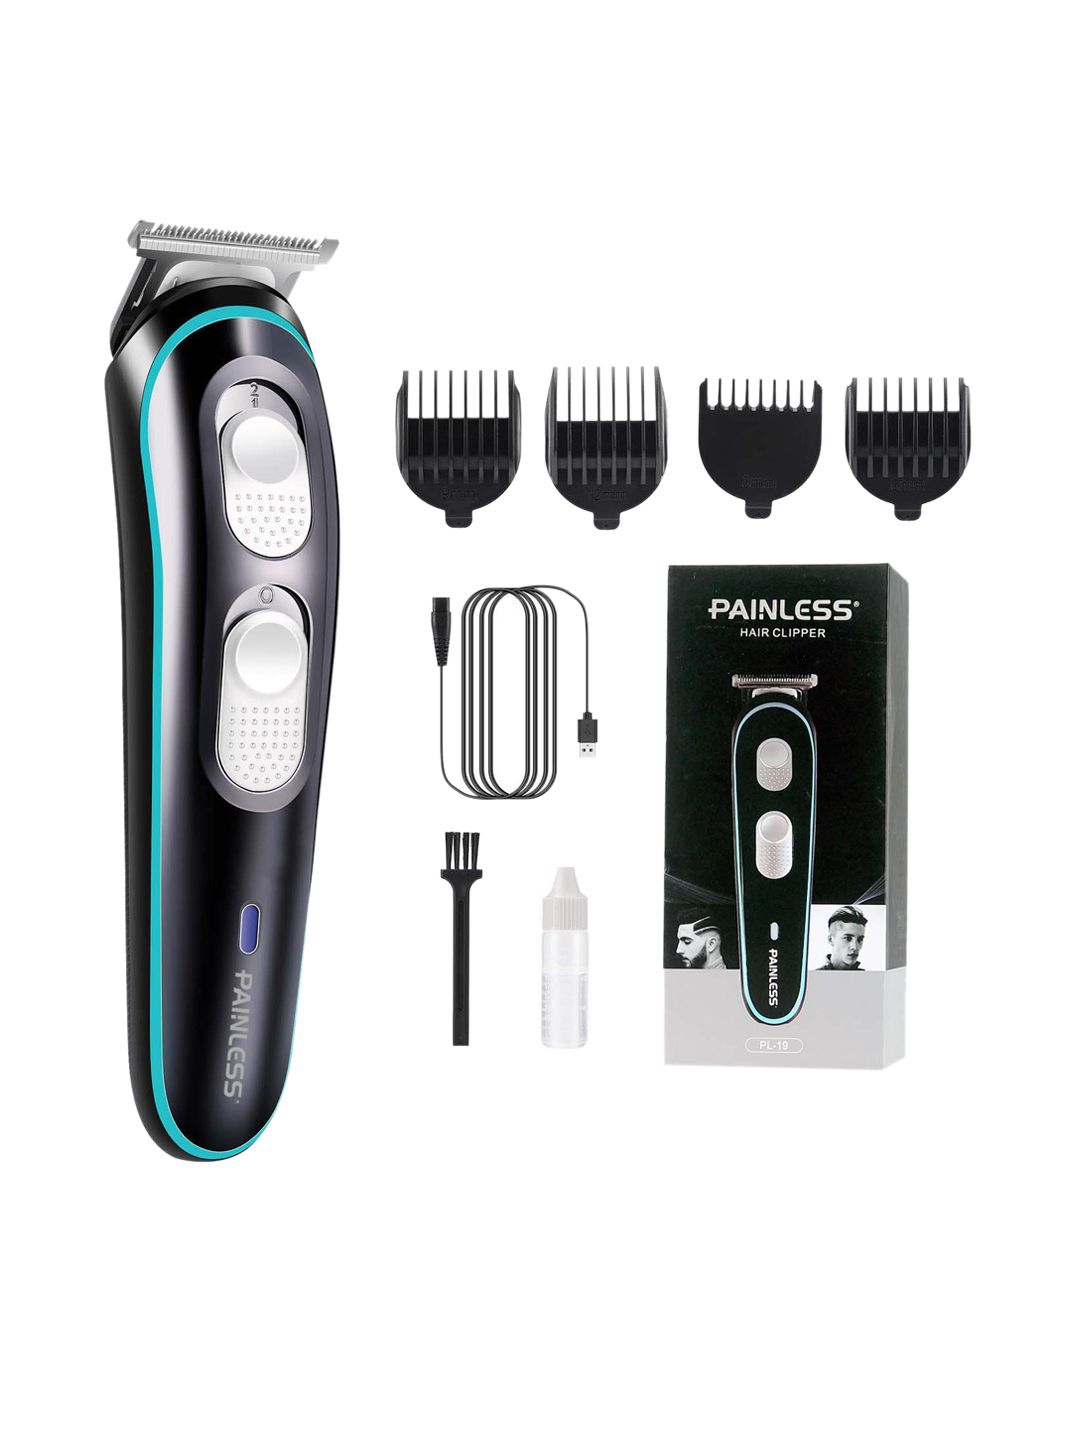 TECHFADE 055 Professional Cordless Rechargeable Beard Trimmer Hair